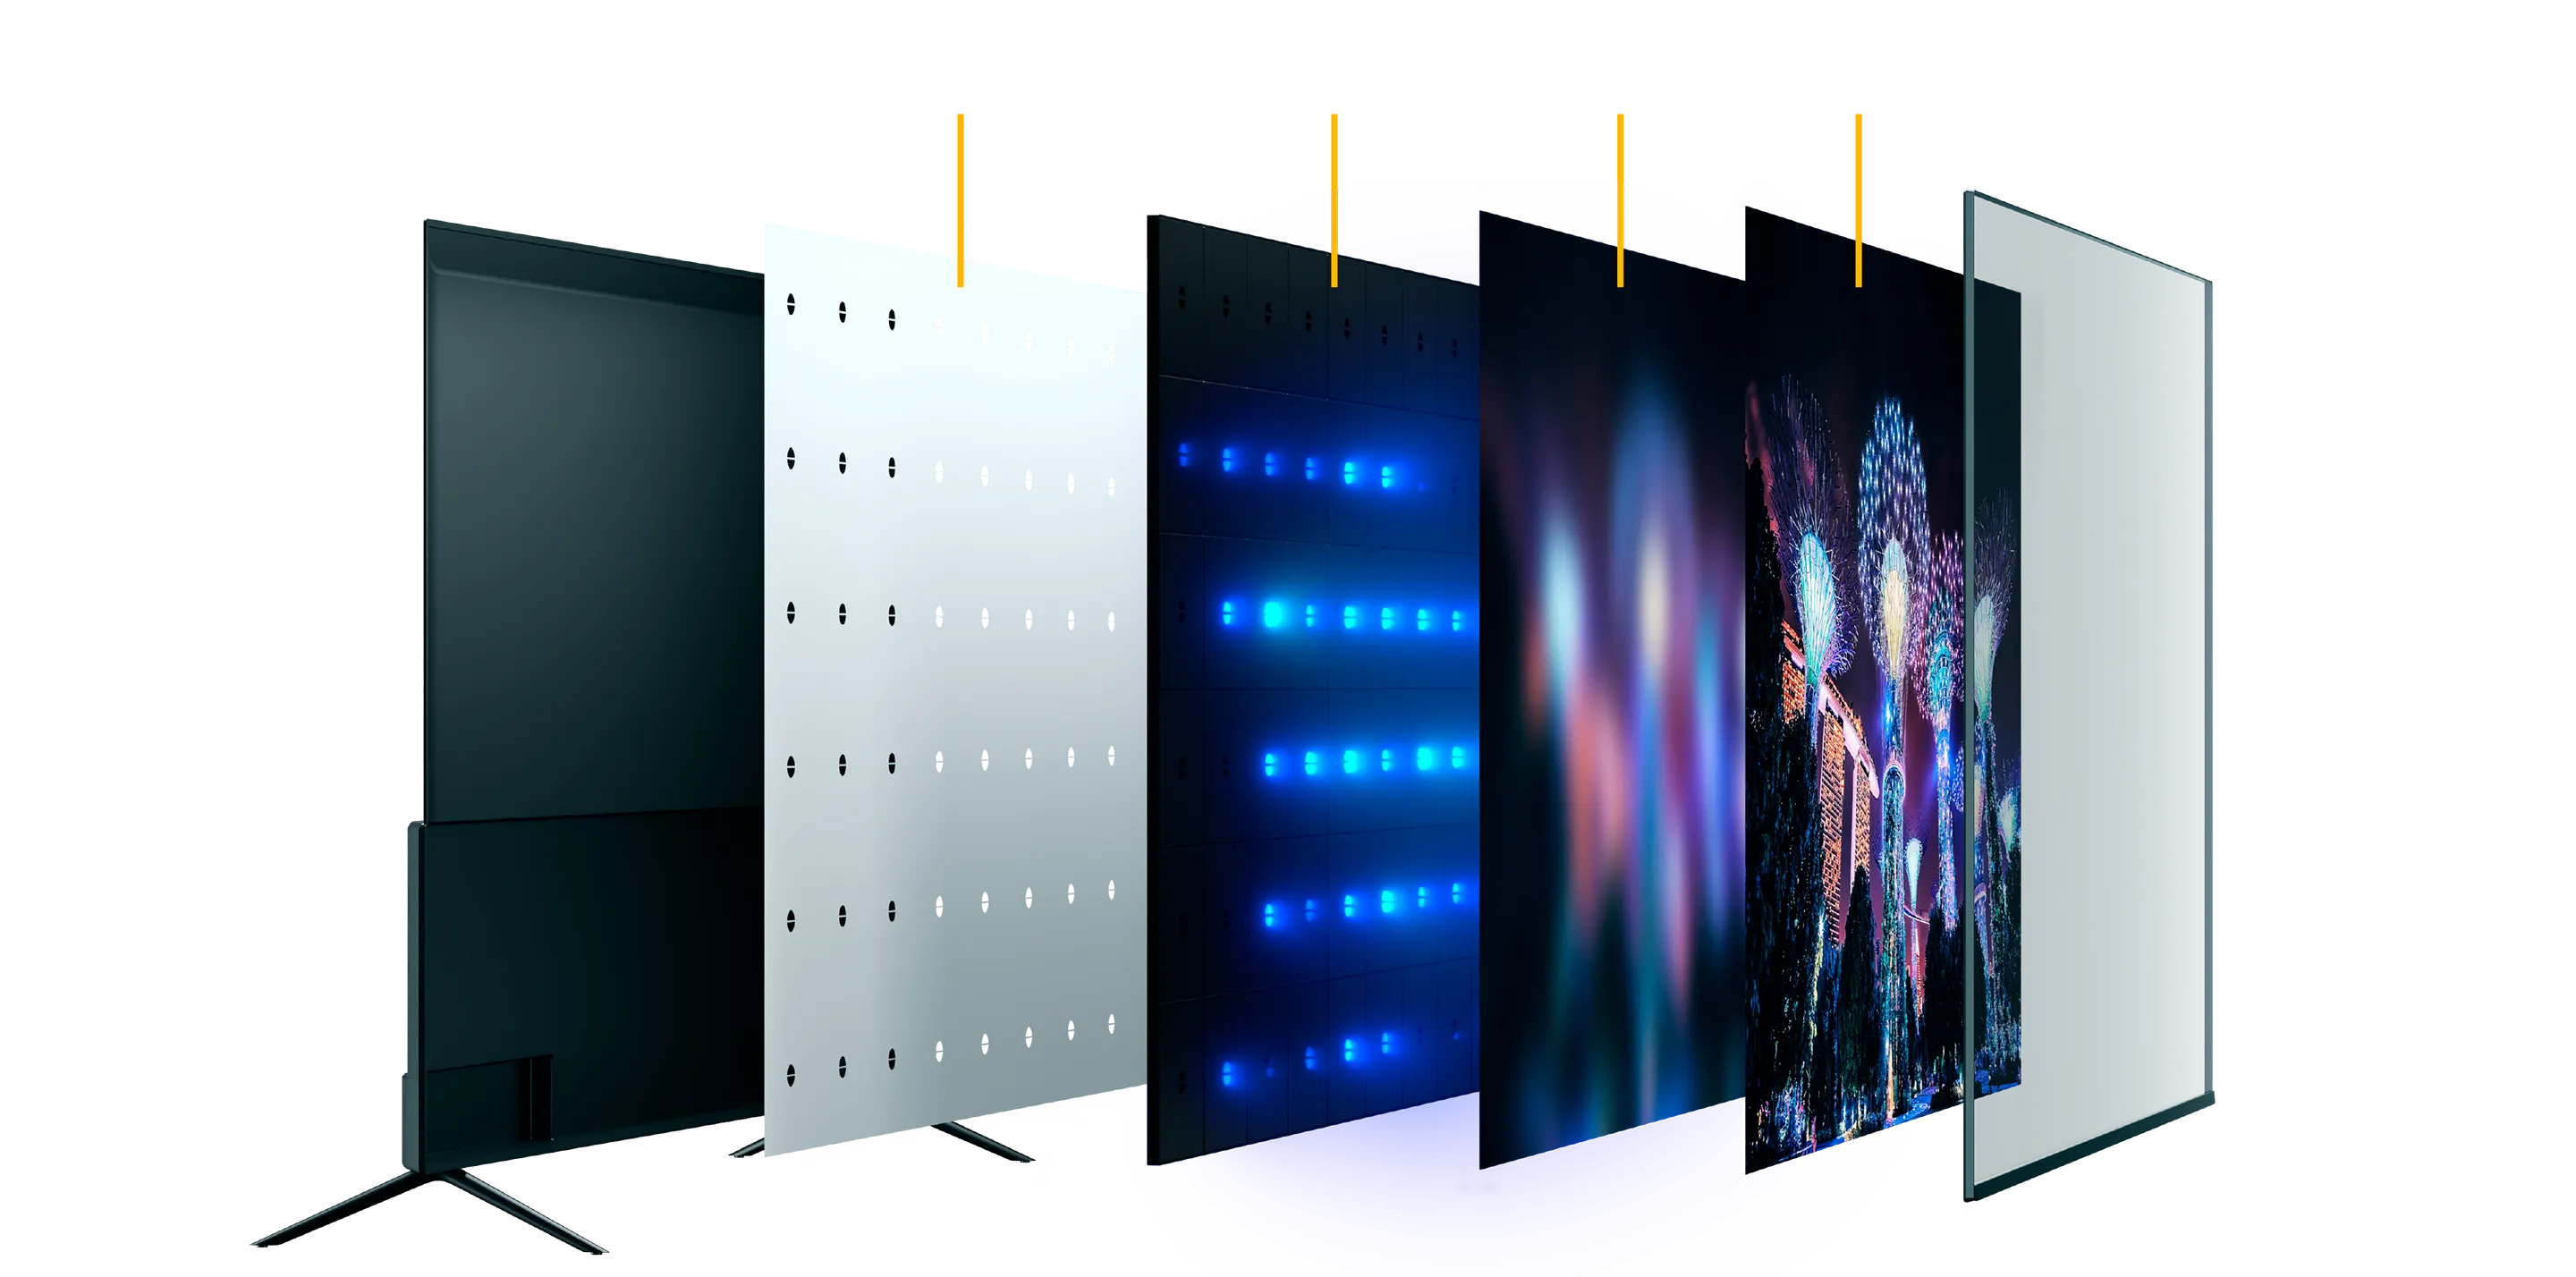 Image showing Q650 series TV screen components - reflector plate, blue light/dimming zones, enrichment layer and LCD panel